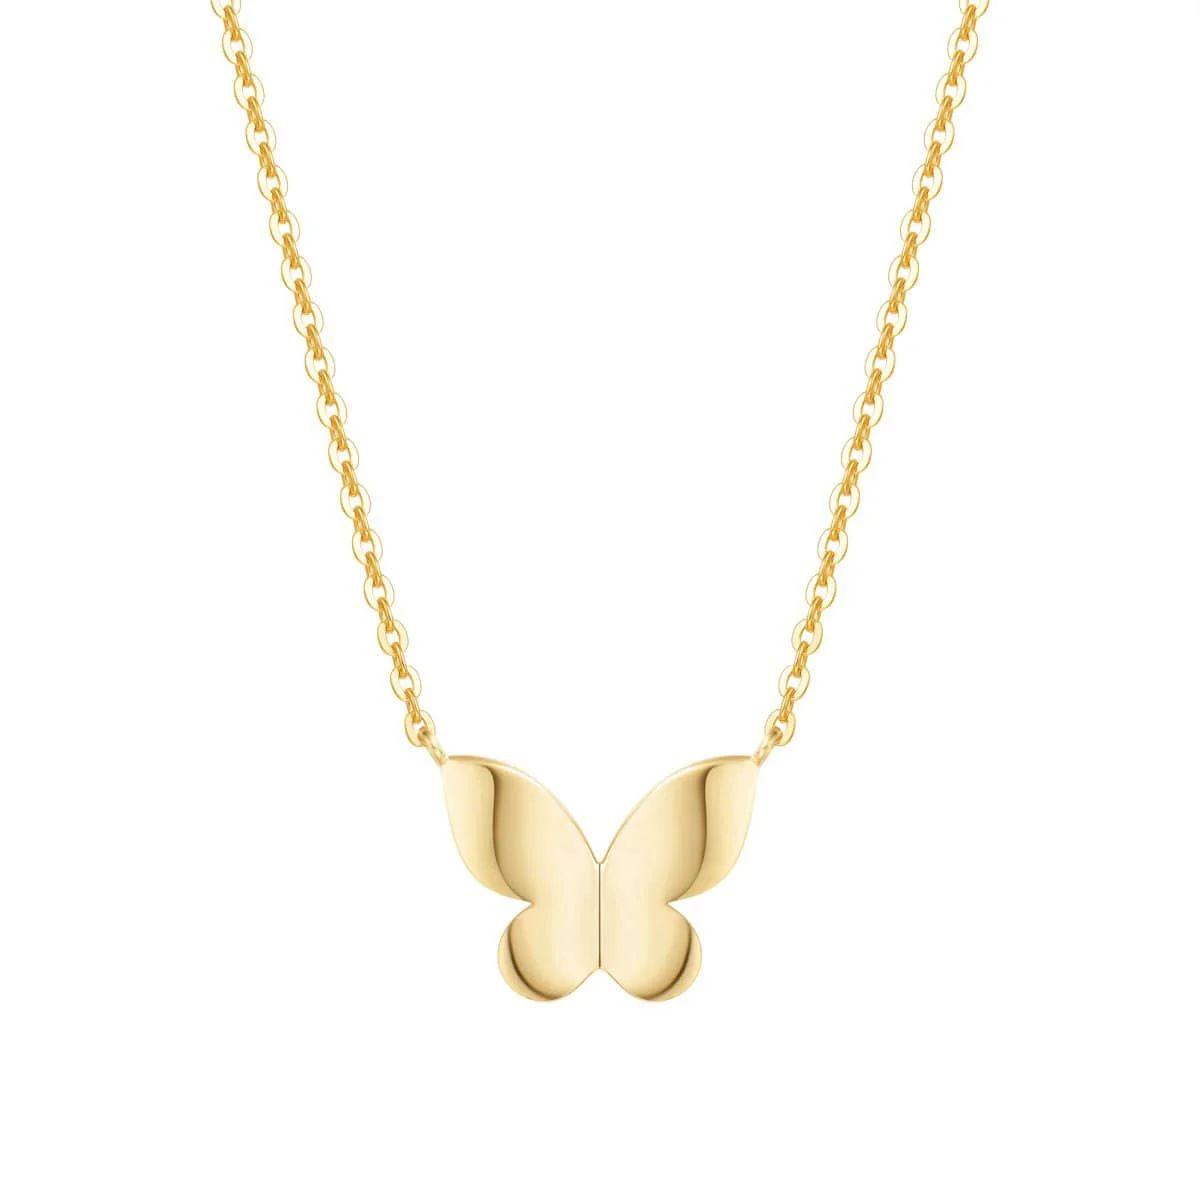 "Dreamy Butterfly" 14K Yellow Gold Butterfly Necklace | FANCIME